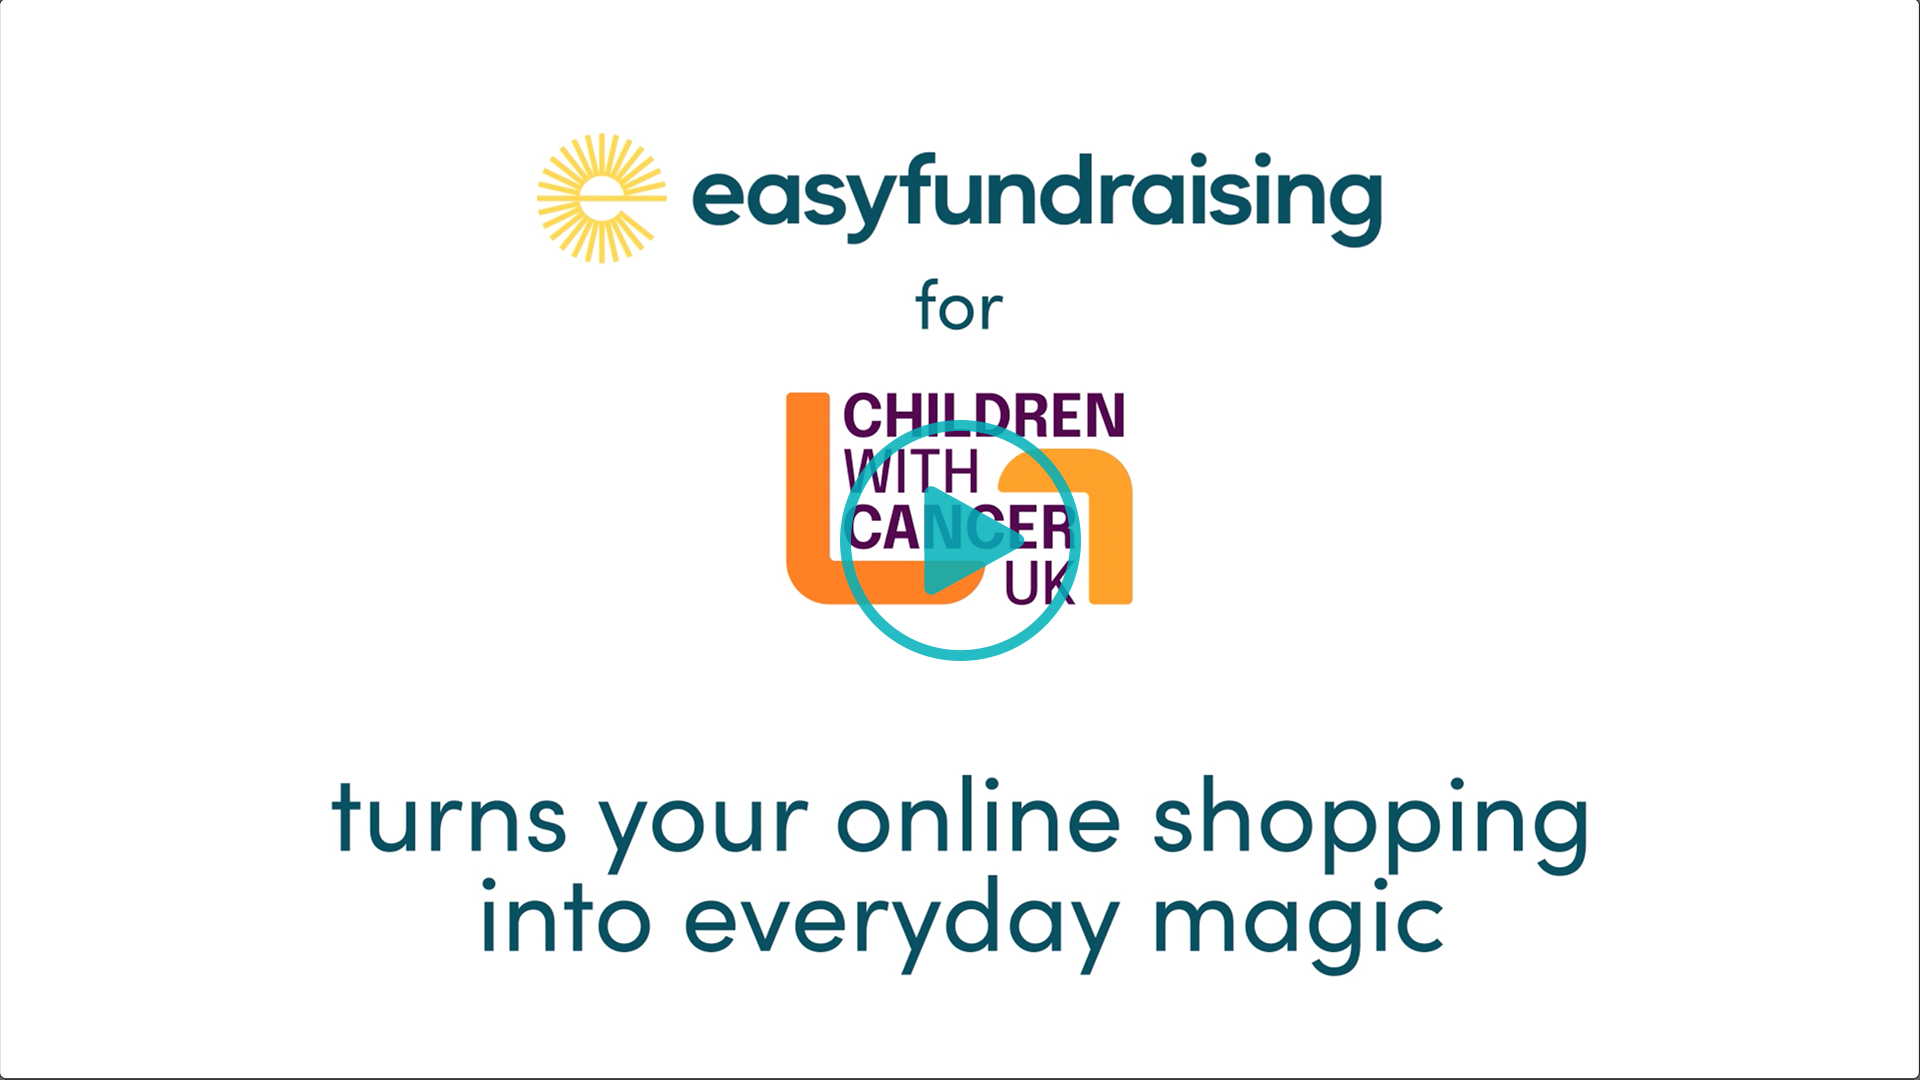 We turn your daily shopping into everyday magic